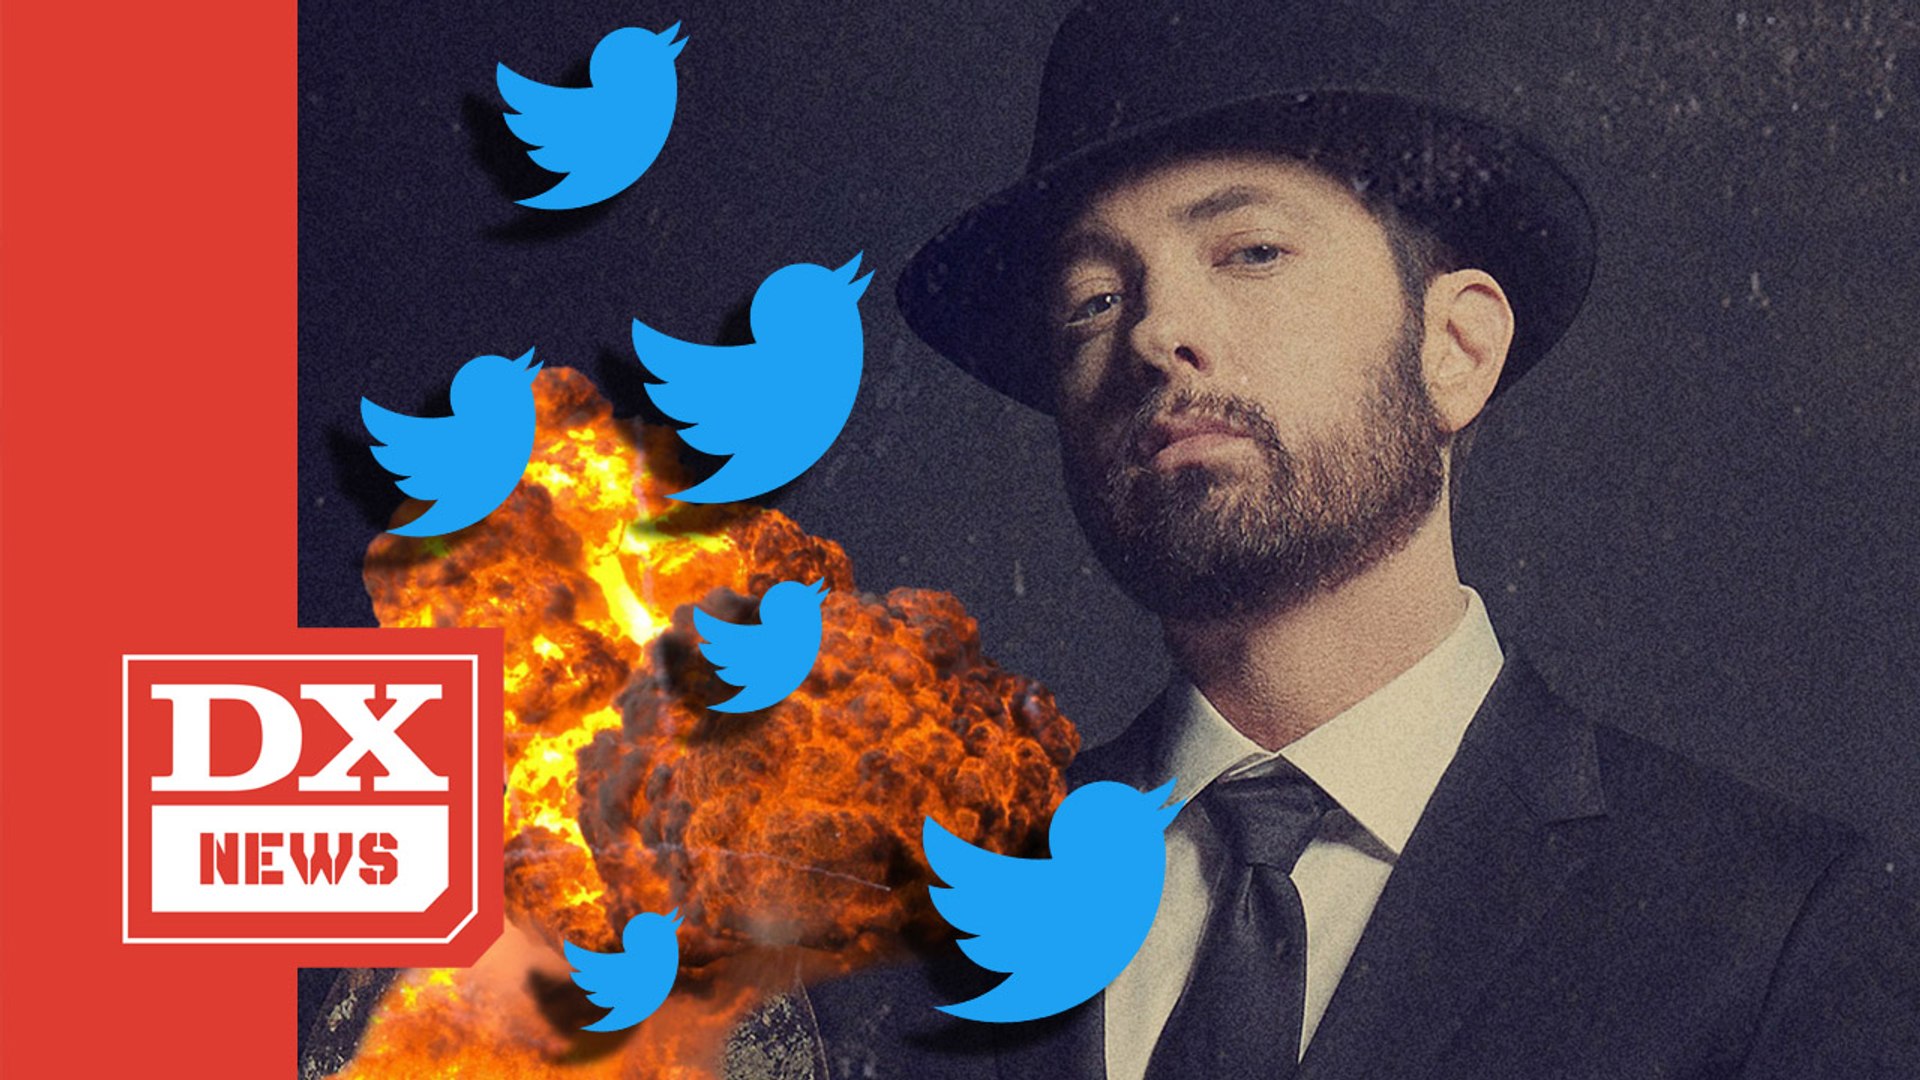 Twitter Explodes With Reactions To Eminem's 'Music To Be Murdered By' Album